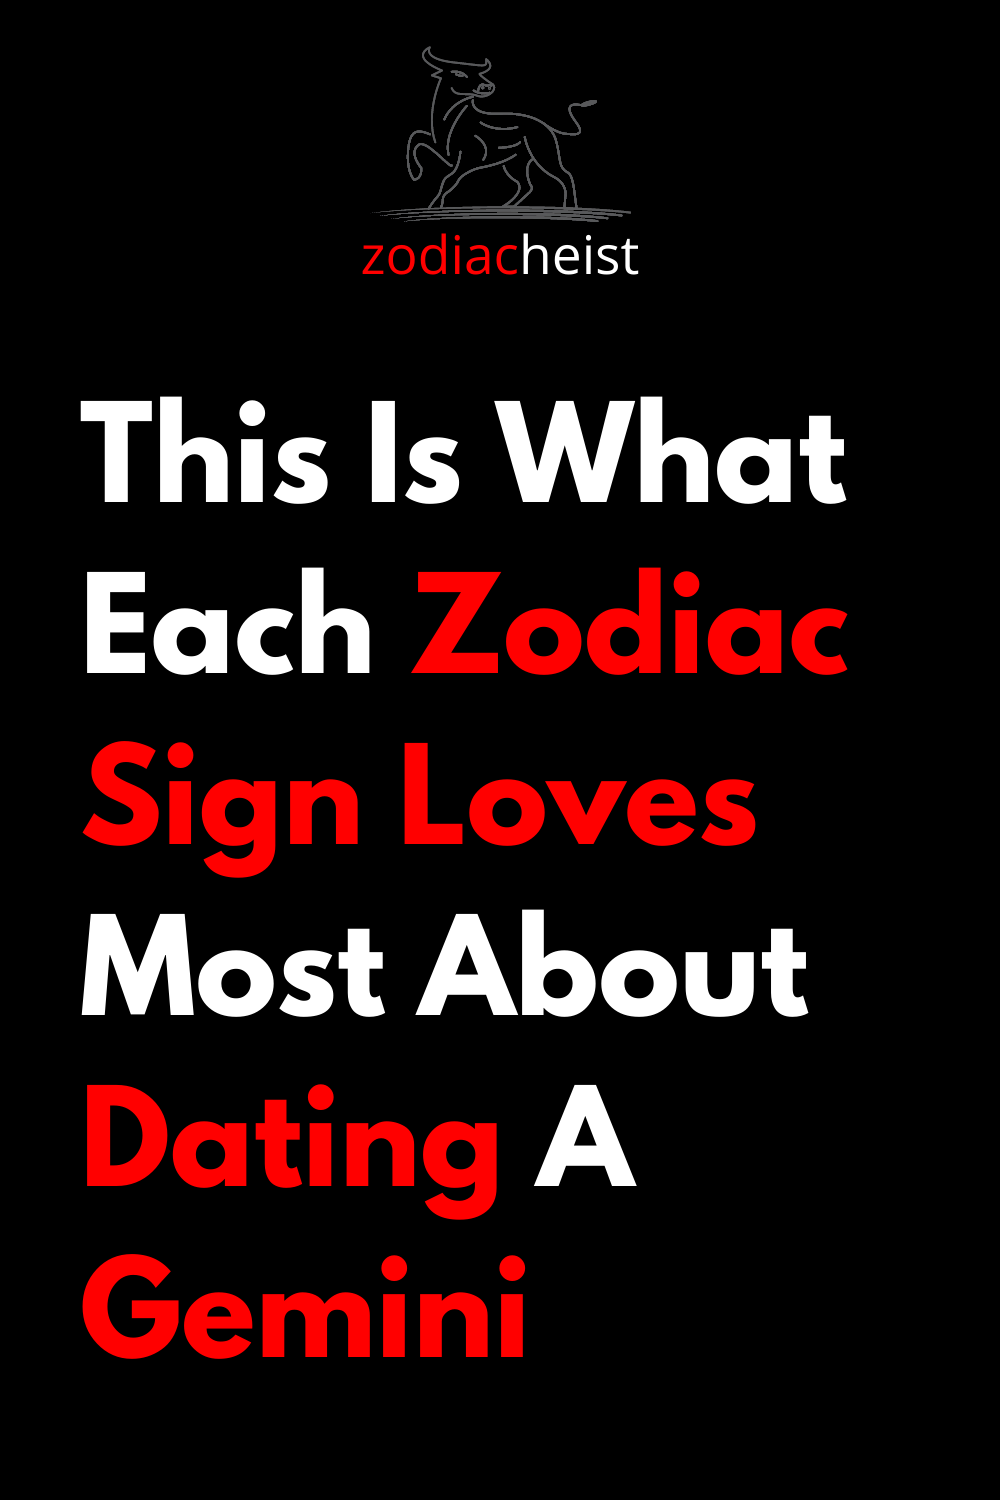 This Is What Each Zodiac Sign Loves Most About Dating A Gemini